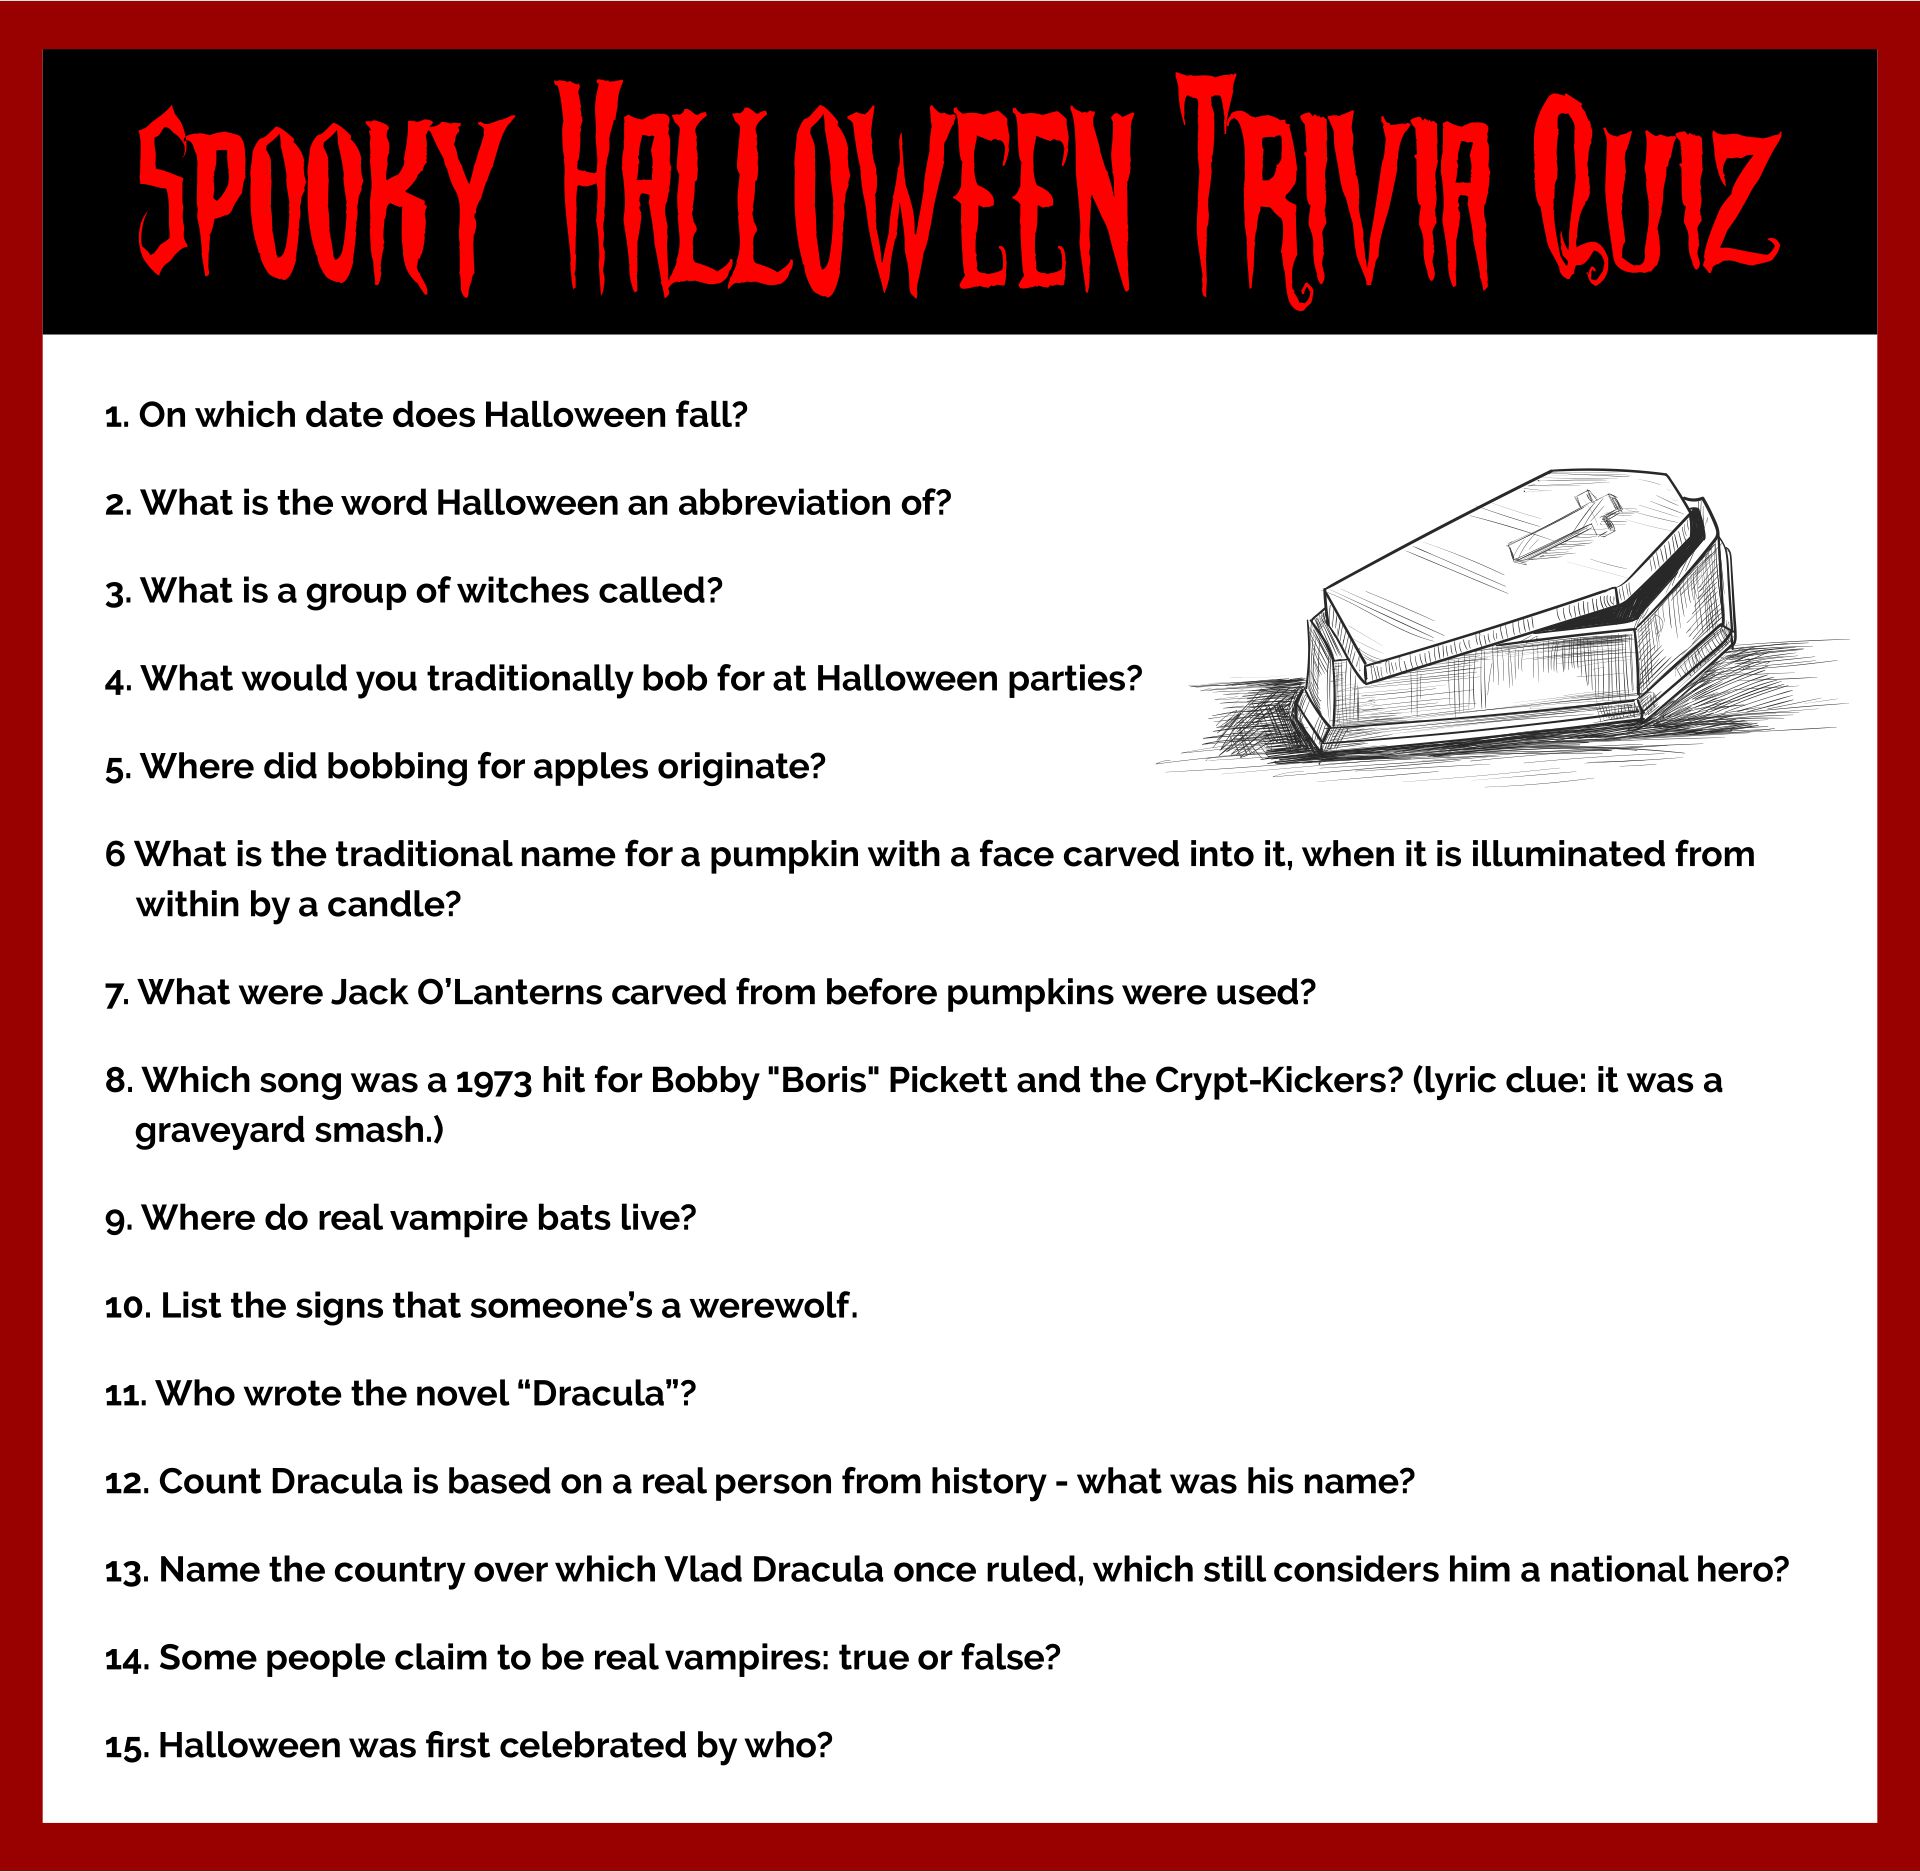 Free Printable Halloween Trivia Quiz For Adults